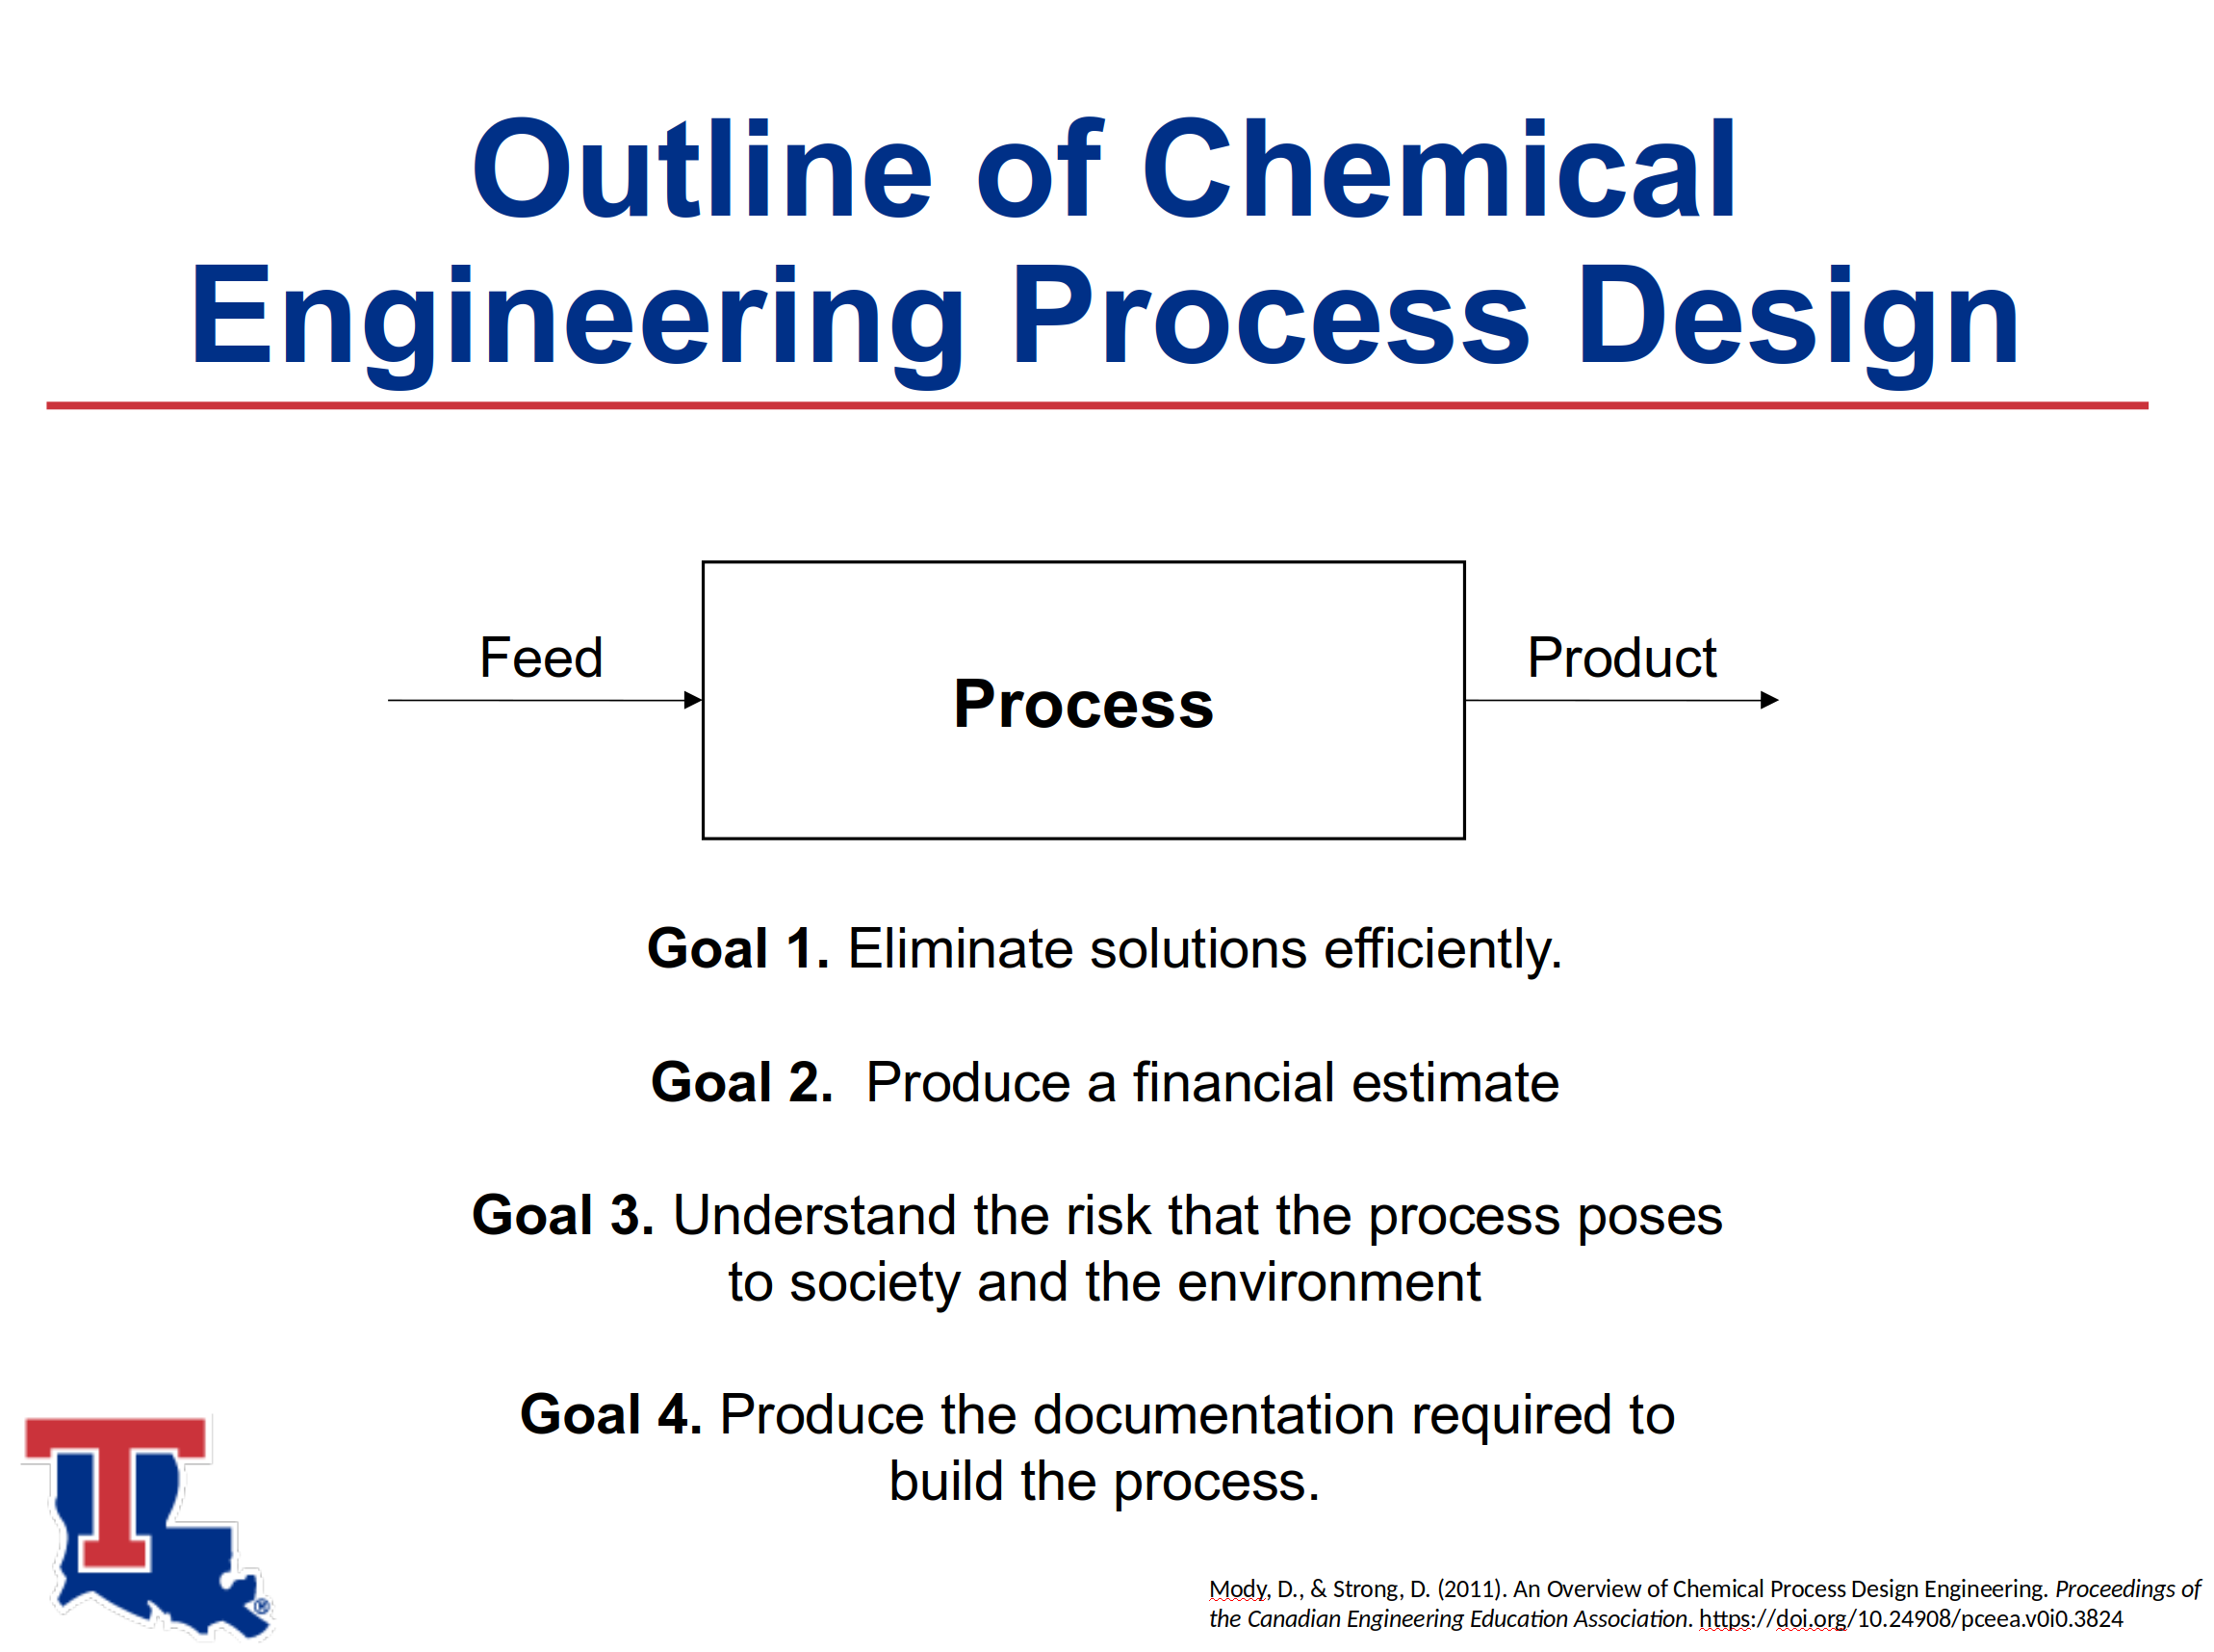 Outline of Chemical Engineering Process Design